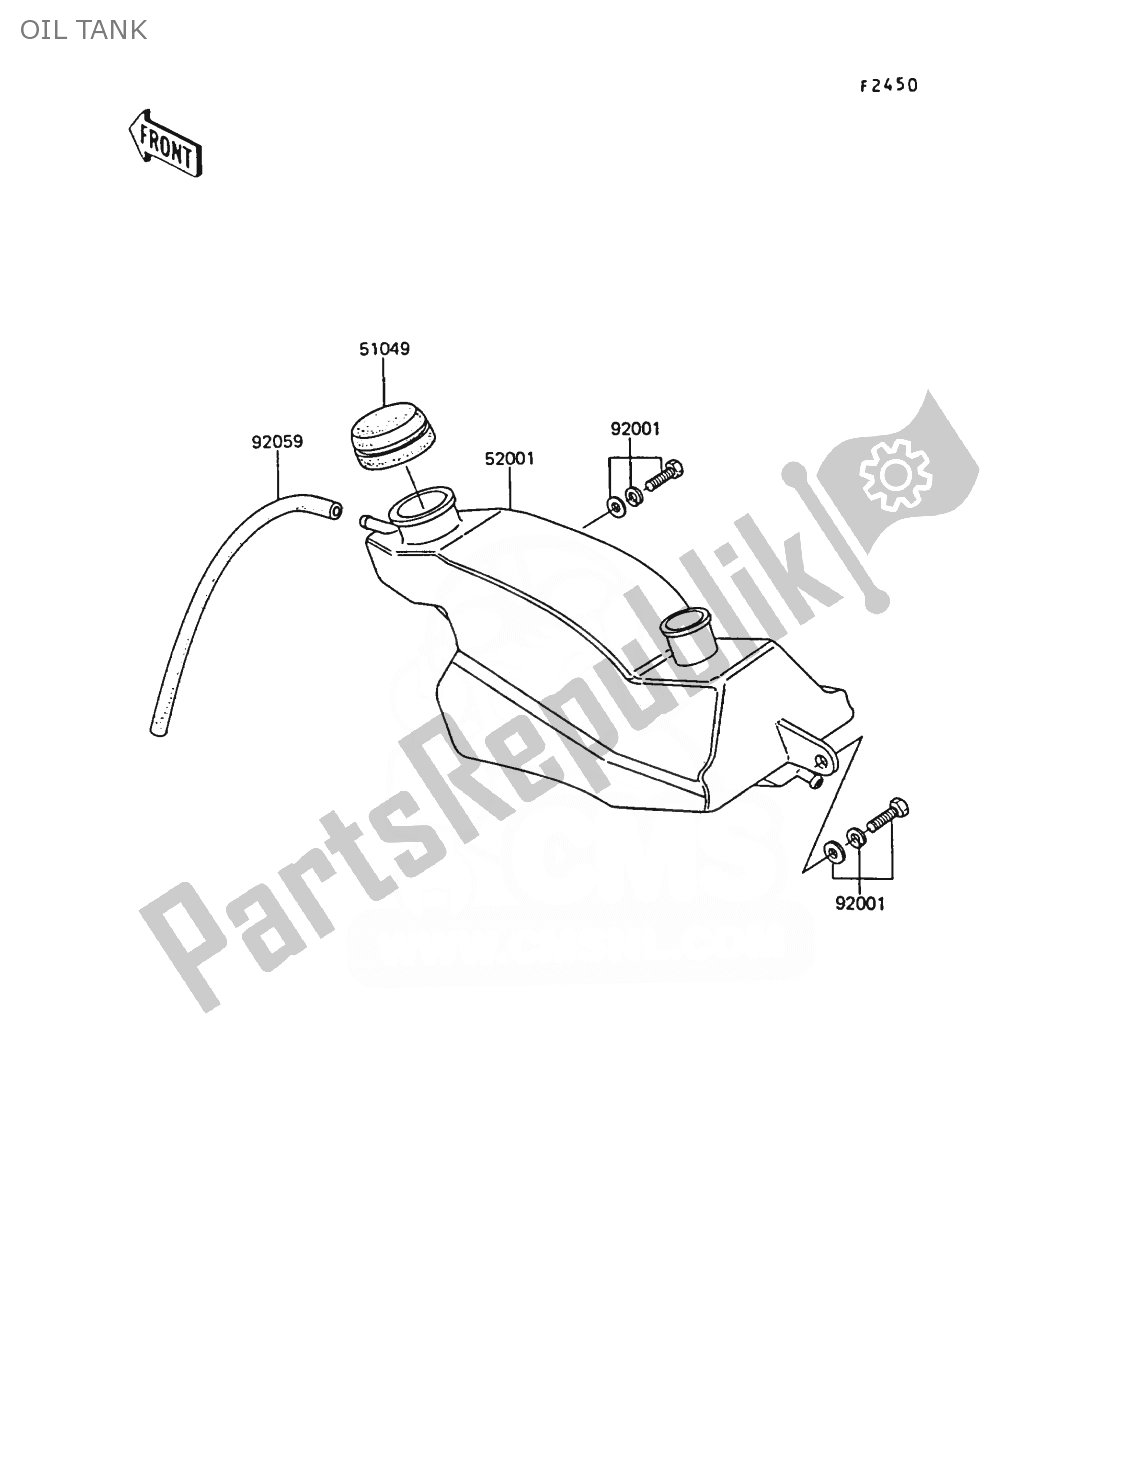 All parts for the Oil Tank of the Kawasaki AR 50 1989